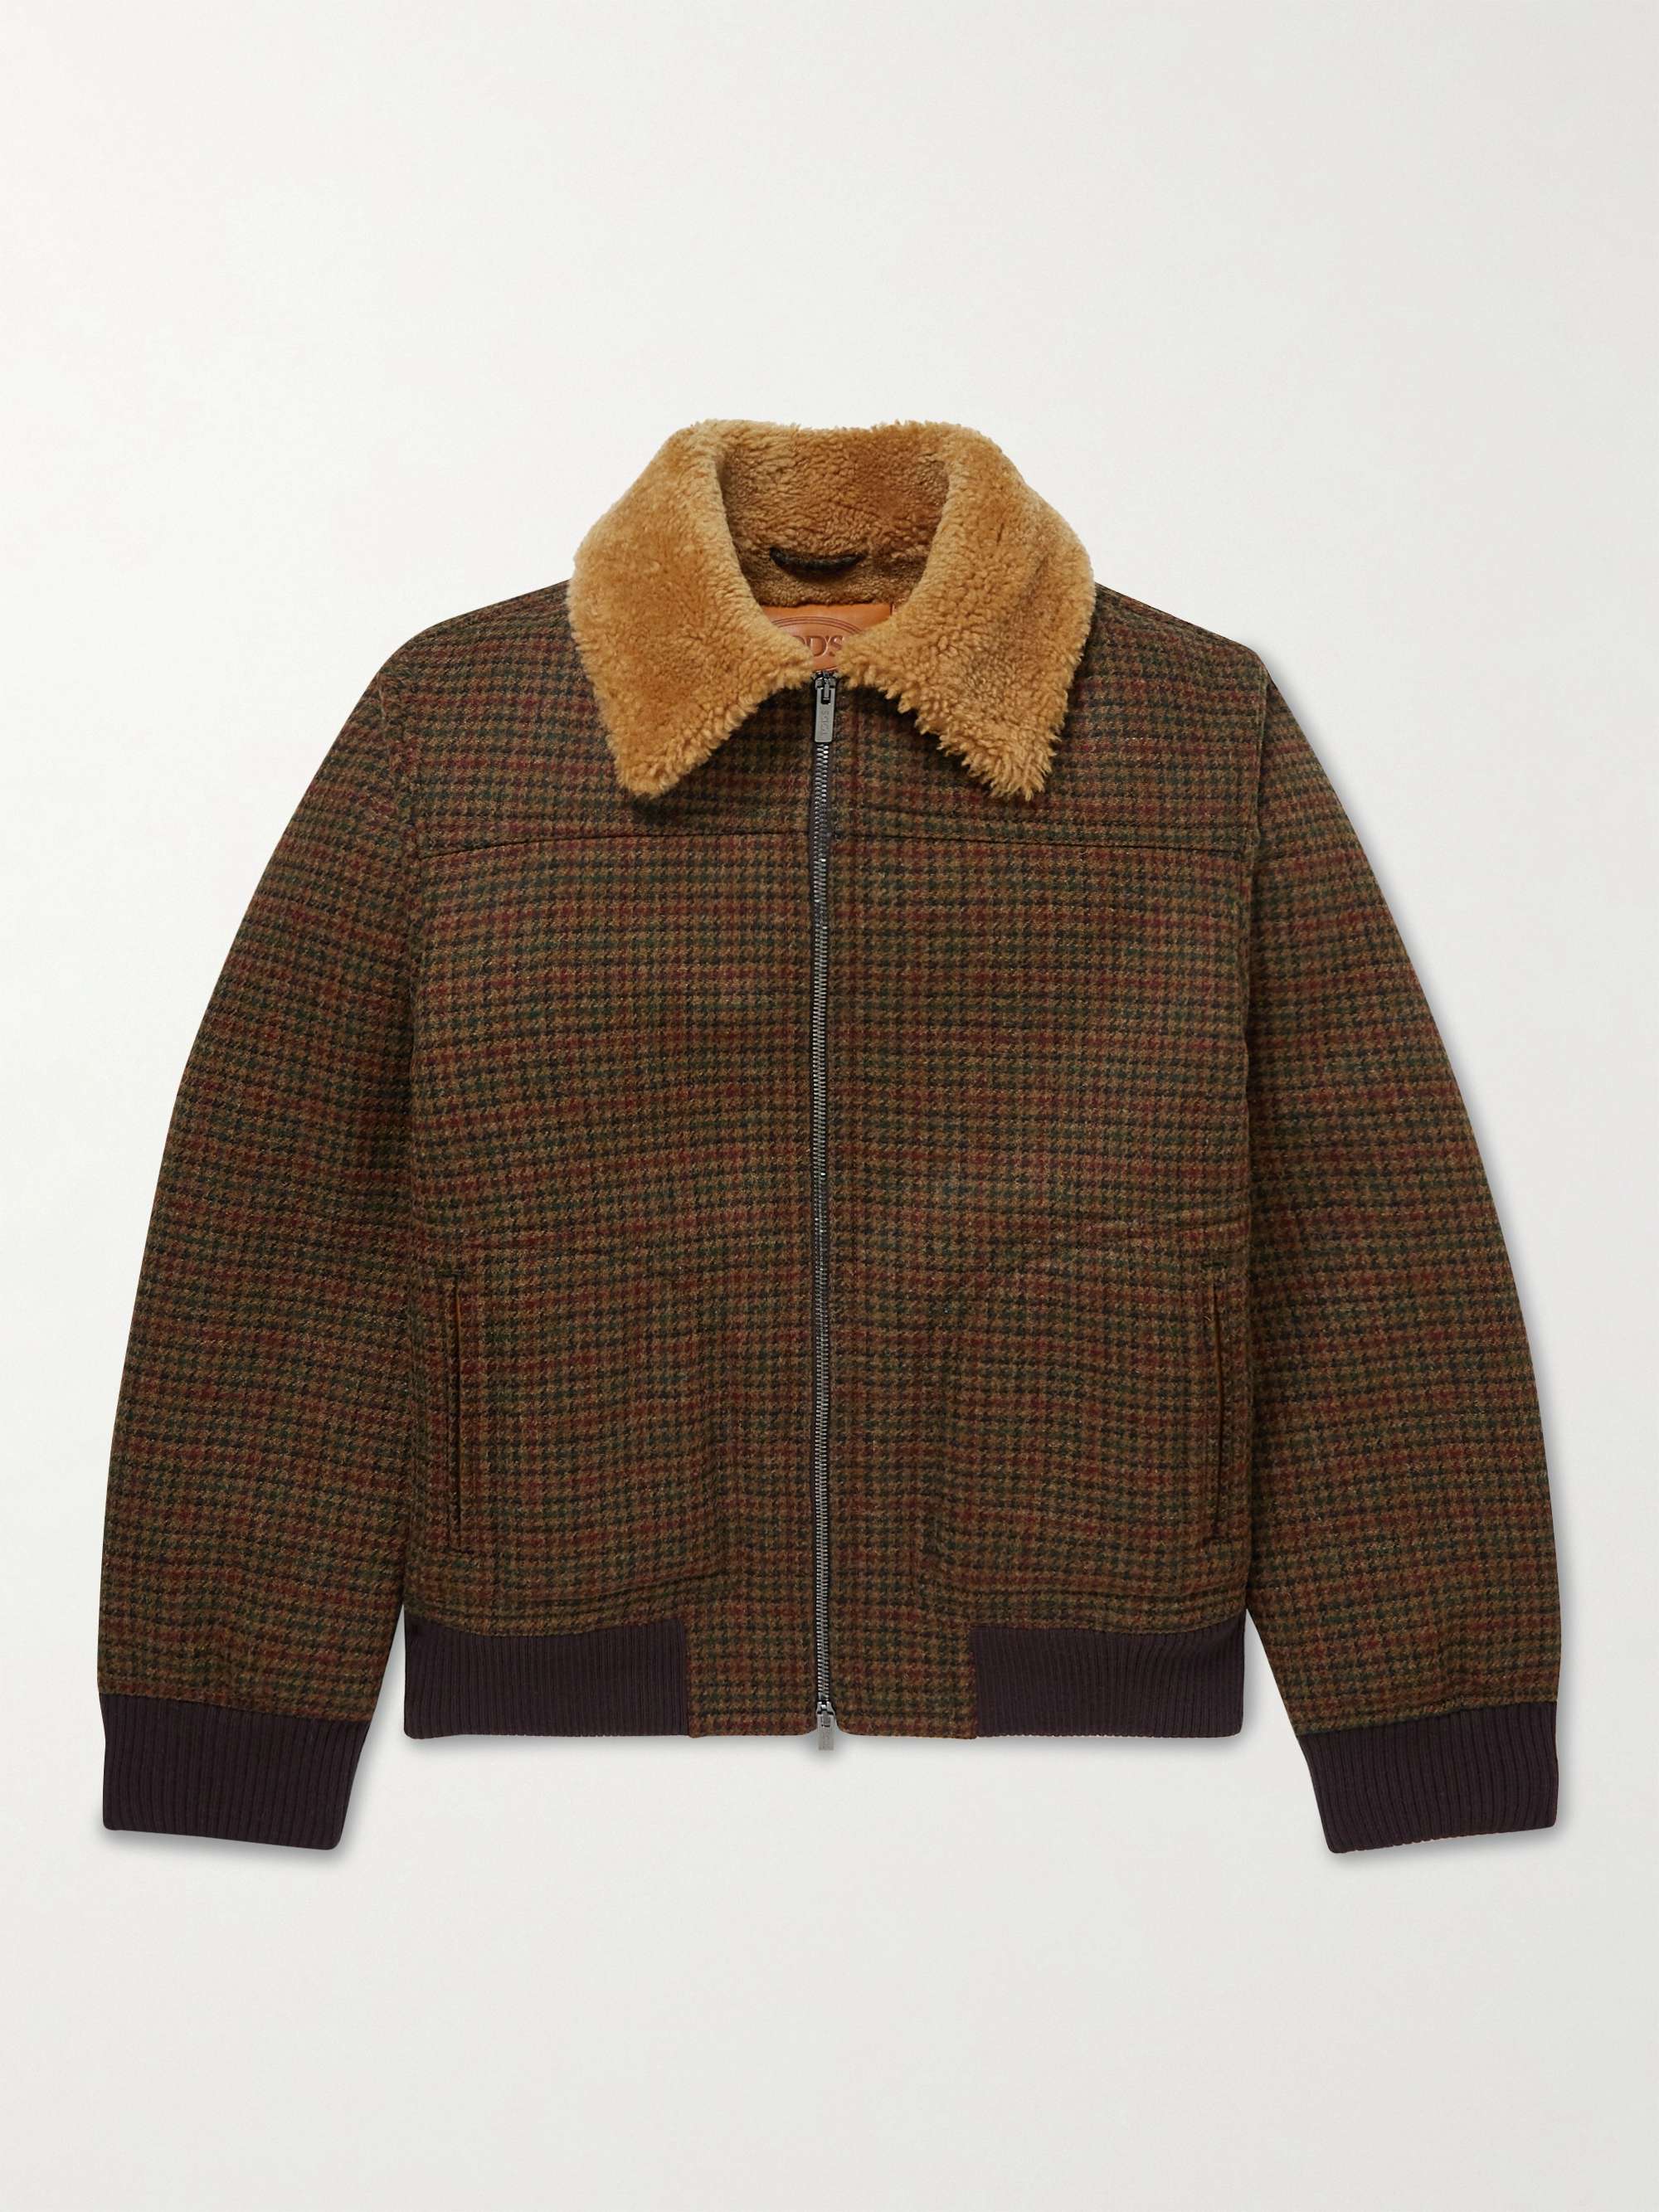 TOD'S Shearling-Lined Houndstooth Shetland Wool Bomber Jacket